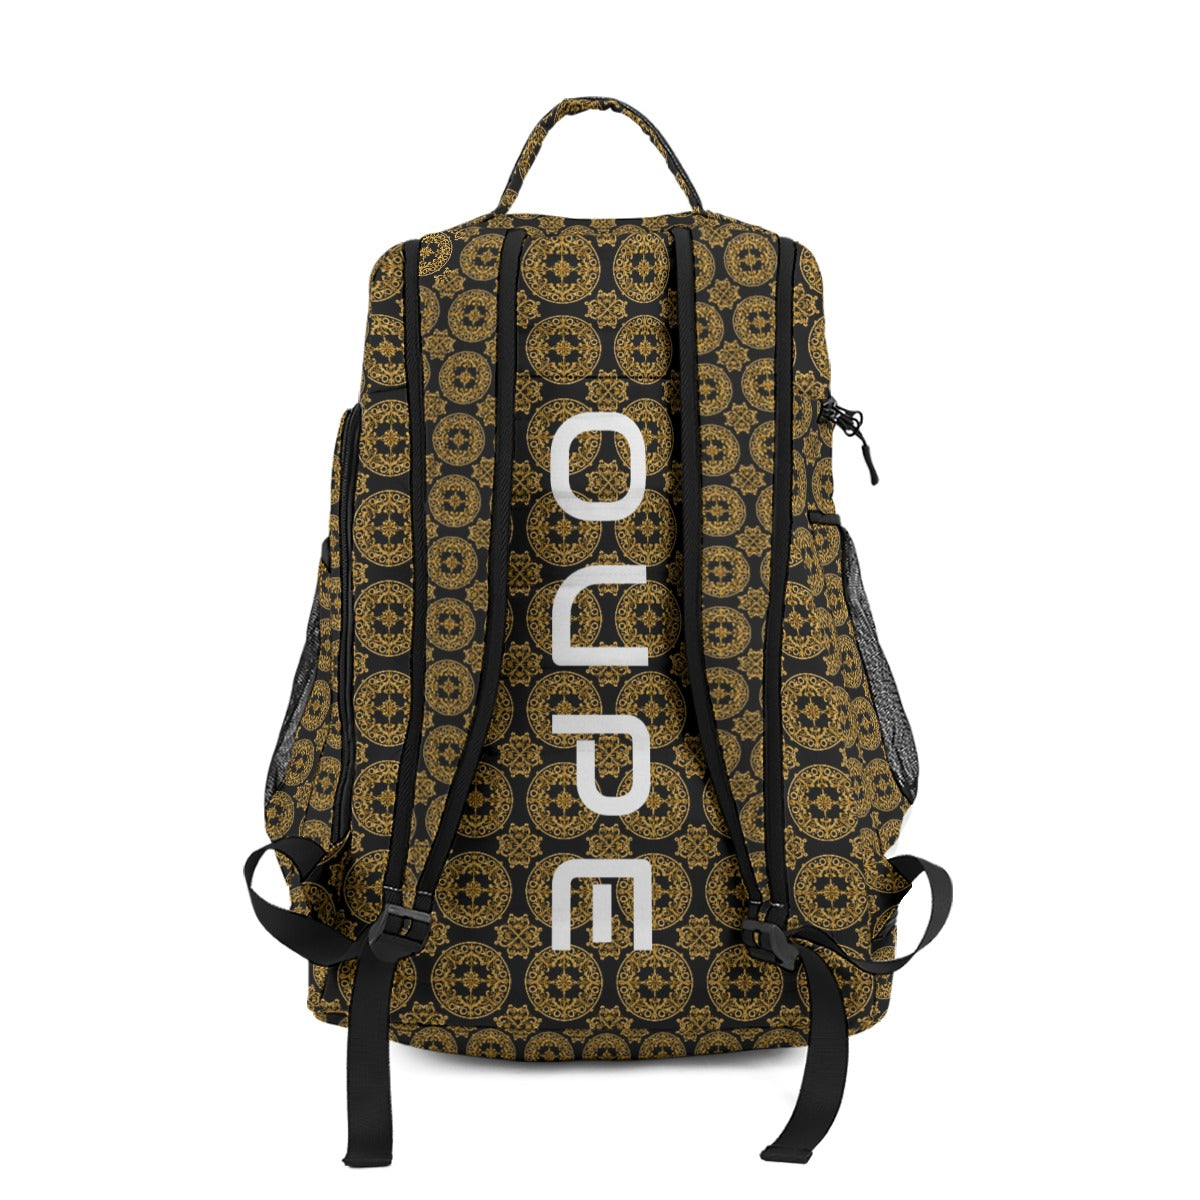 OUPE AC BAROQUE "PALACE" DAY BAG